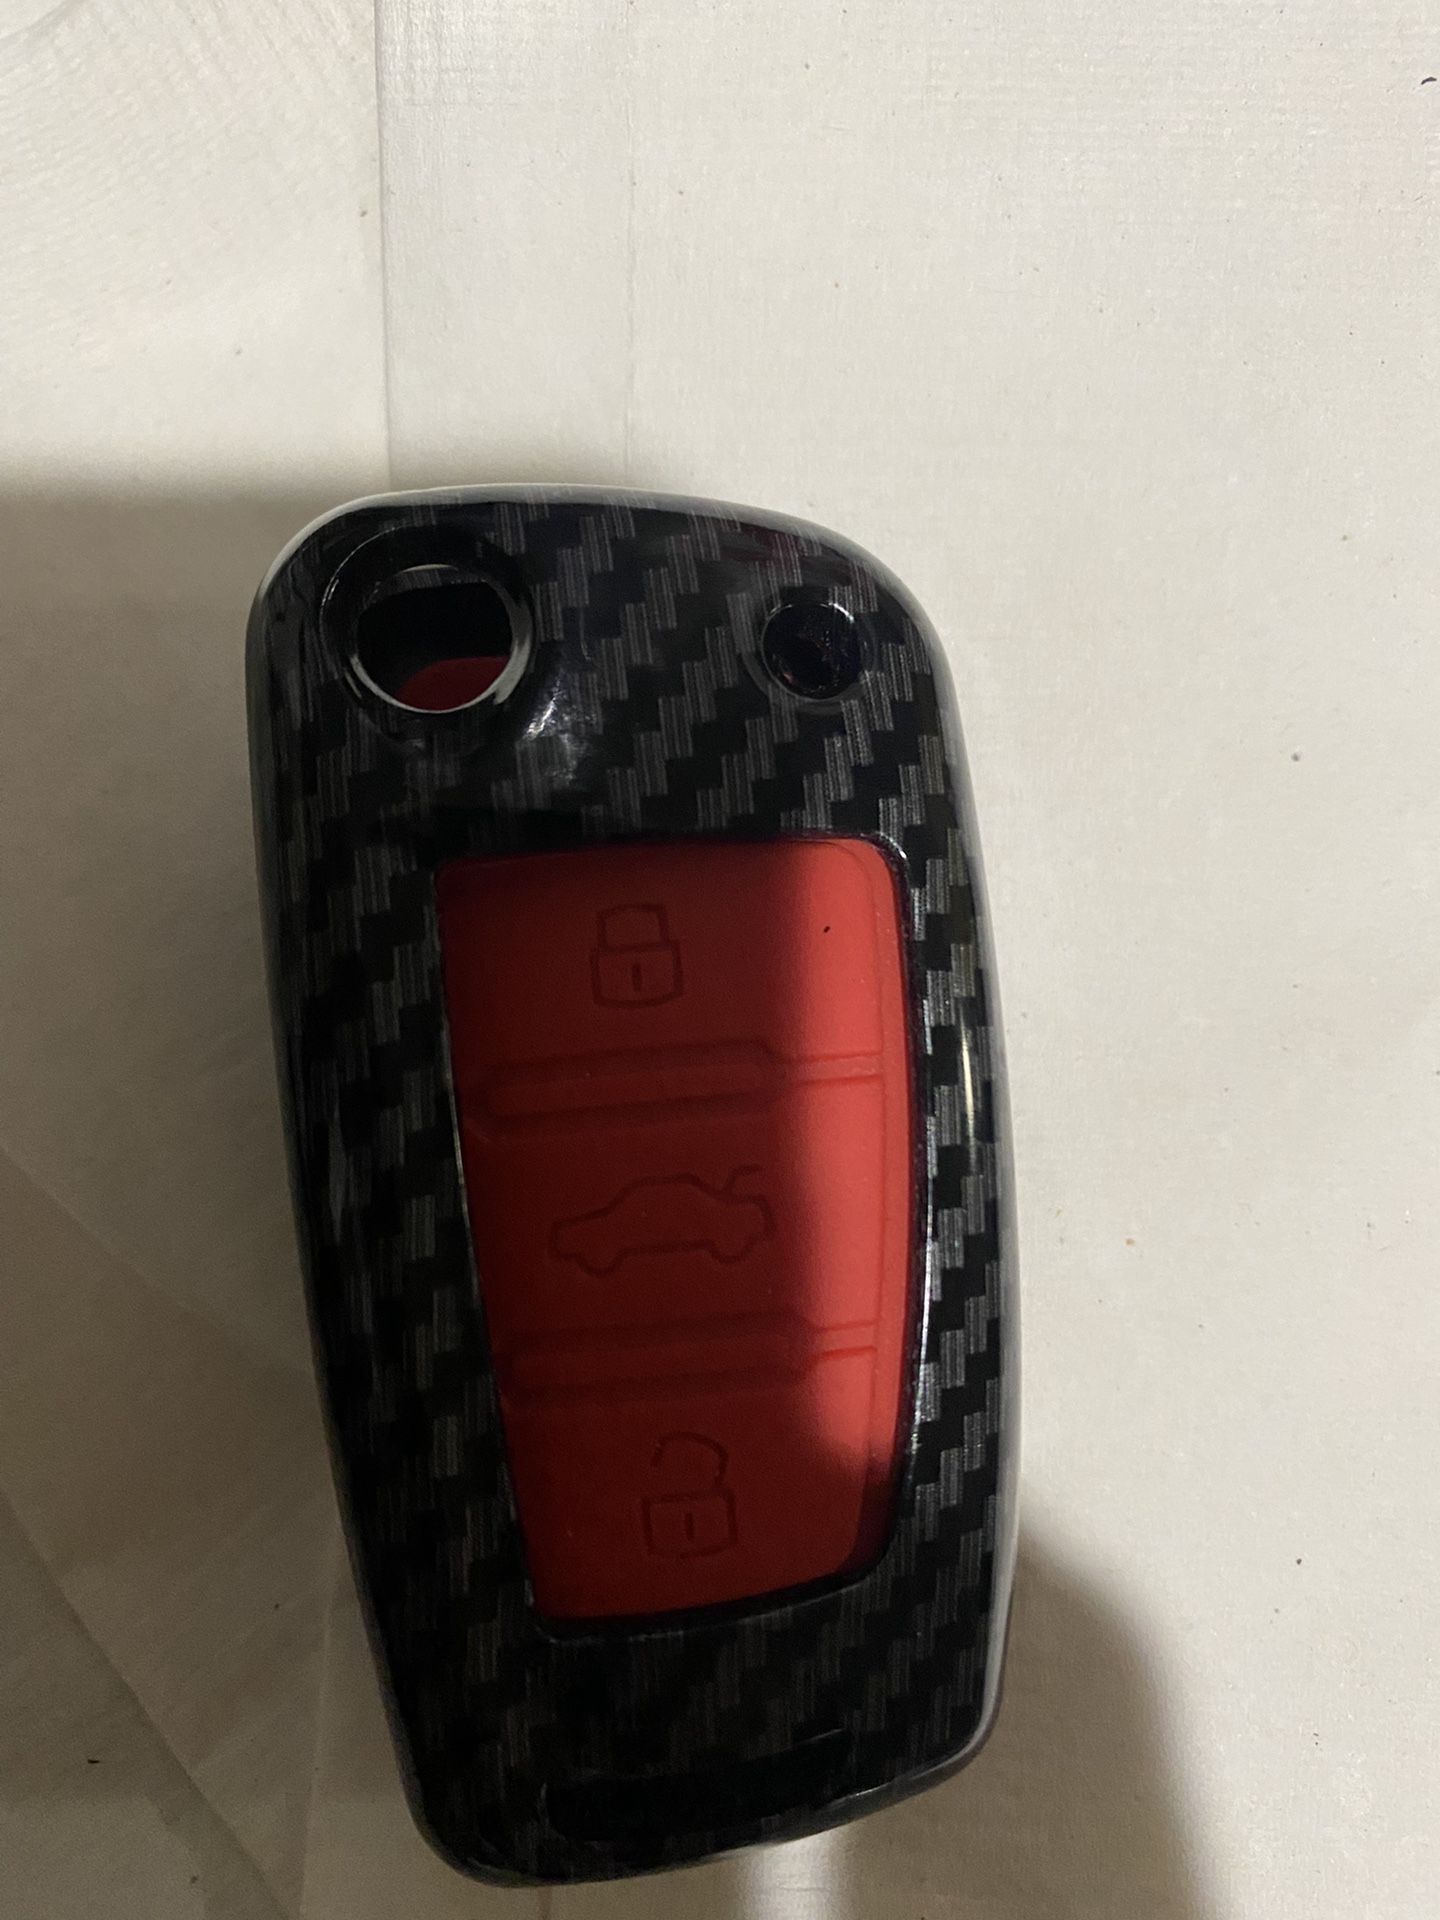 Audi Cover Key For Thi Model